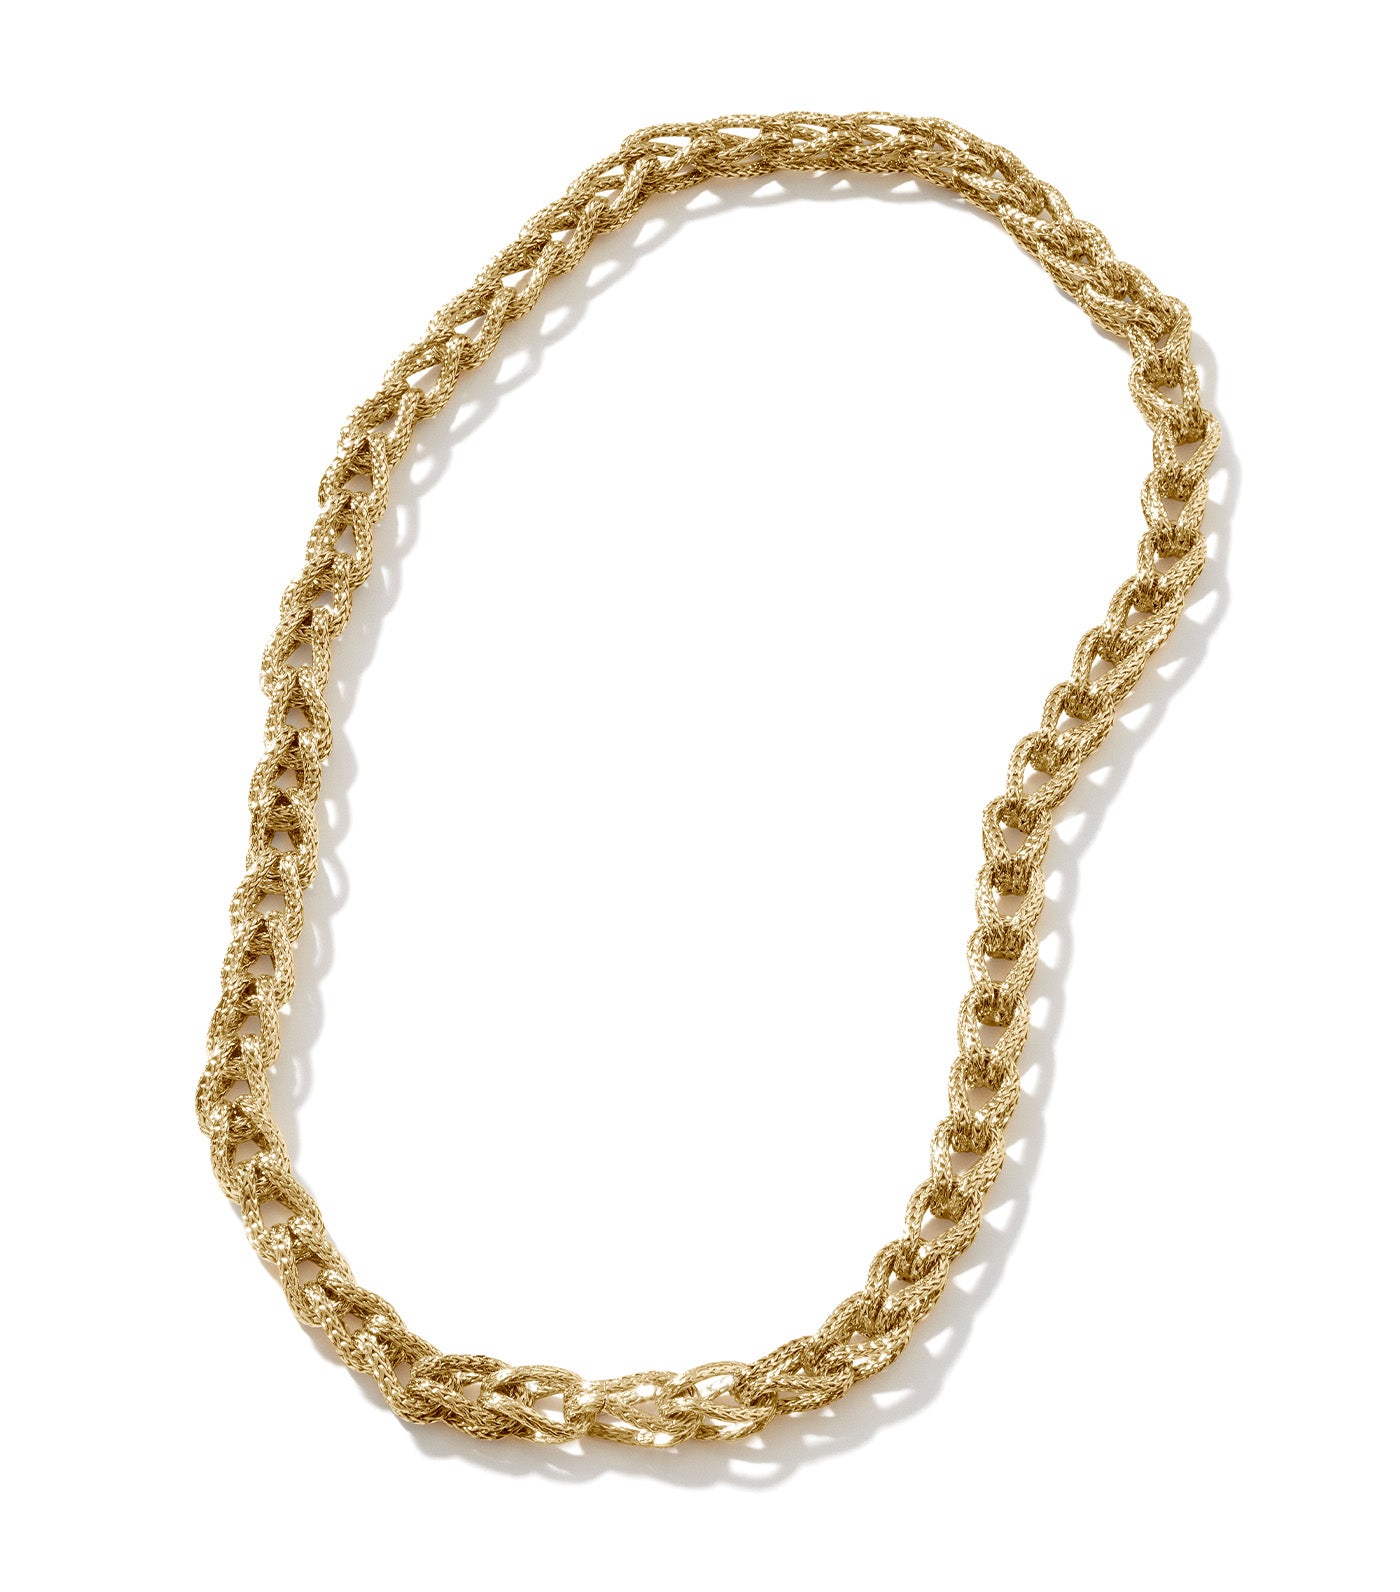 Asli Link 7mm Chain Necklace 18k Yellow Gold